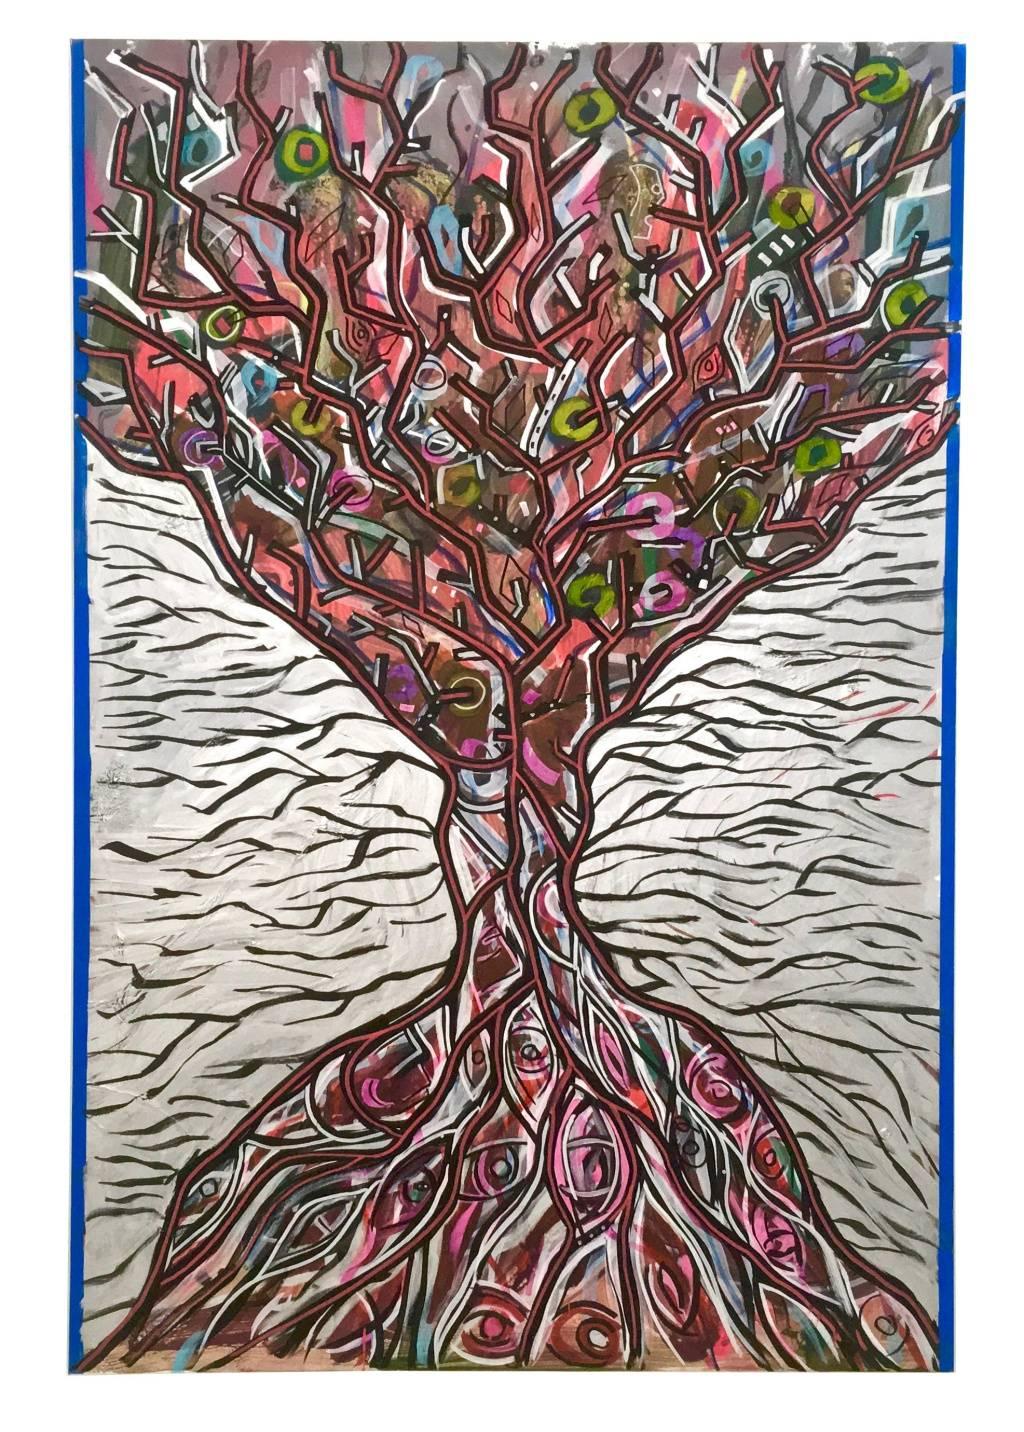 Translated title: "Tree".

Acrylic on canvas.

The artist sells the handmade, original and one-of-a-kind piece, but he reserves the right to duplicate it in multiples or digital prints, following the modality and the circulation he chooses.